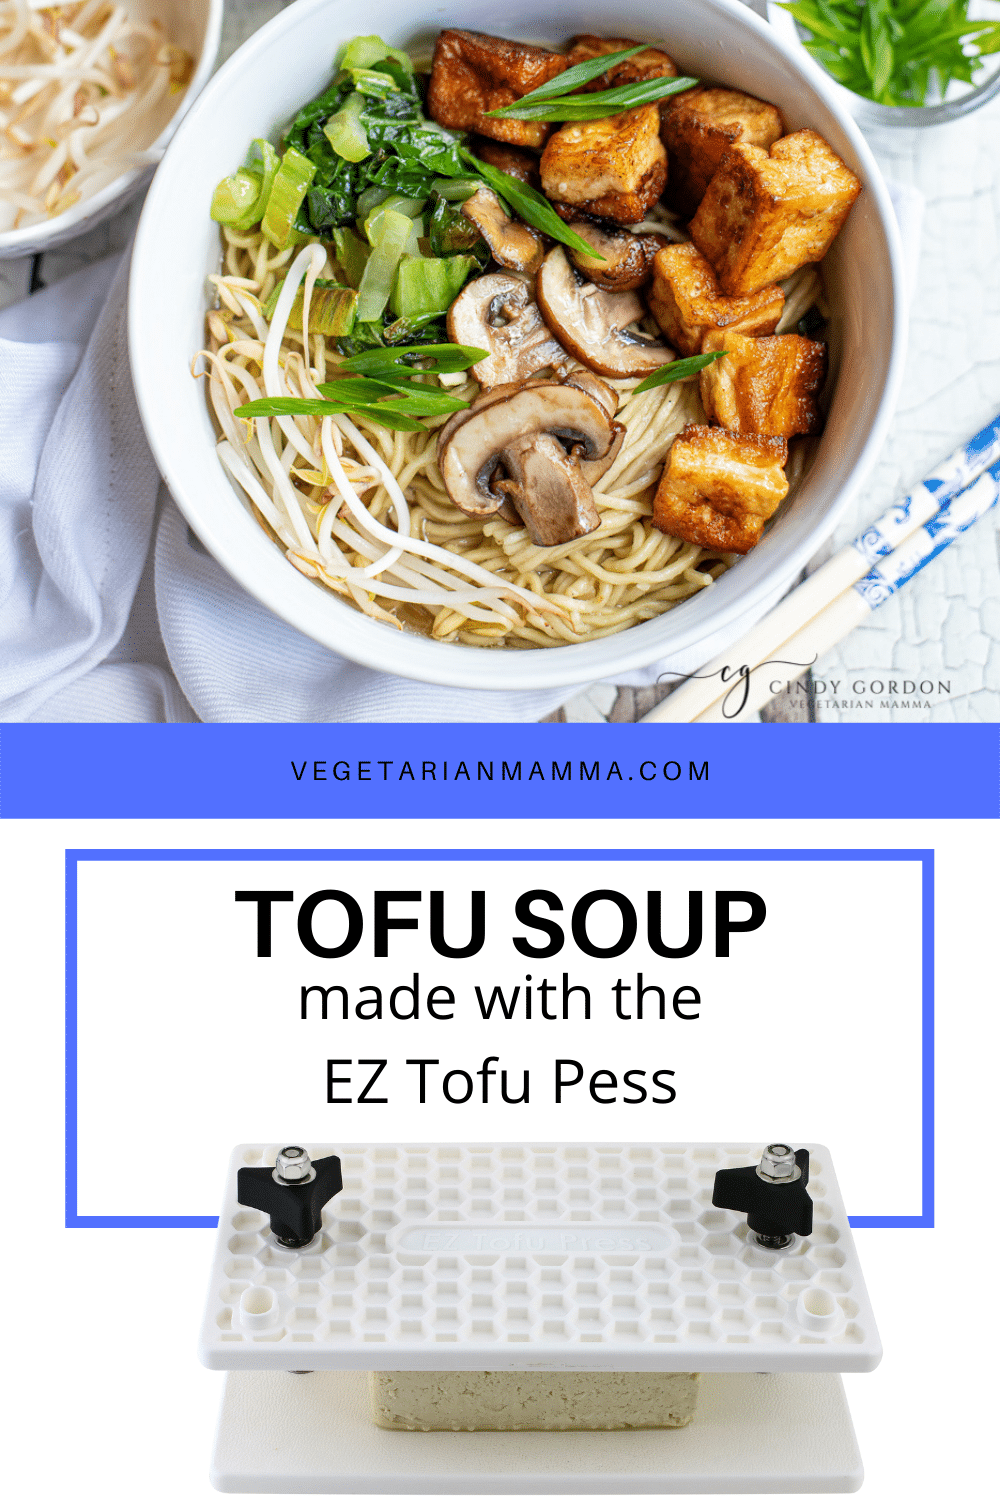 Overhead shot of a bowl of tofu soup with a tofu press and overlay text